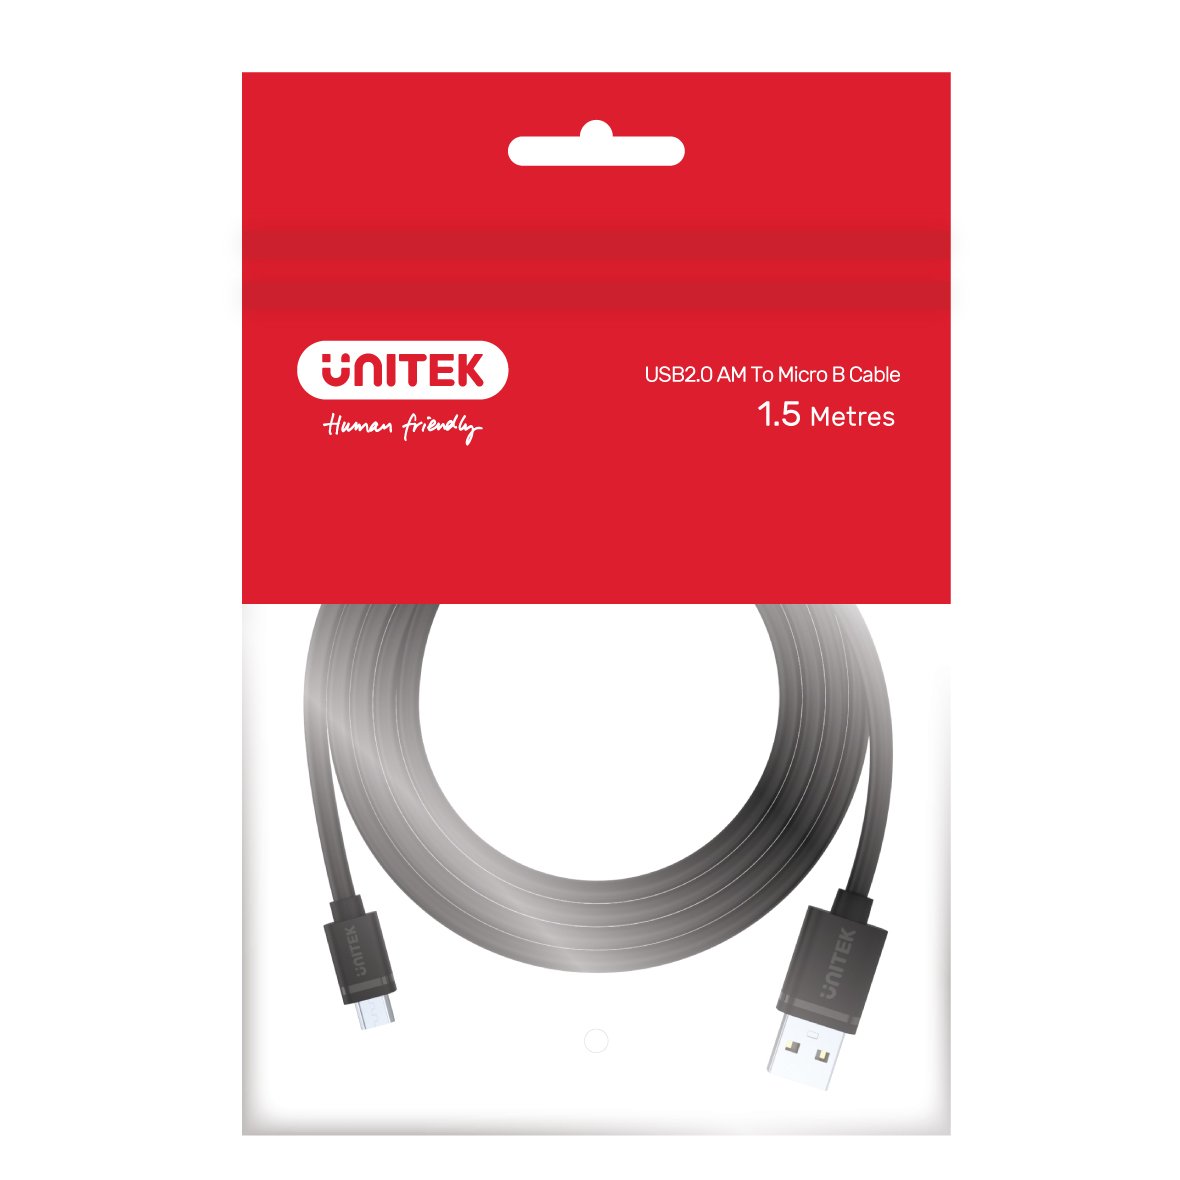 USB 2.0 to Micro USB Charging Cable 2M